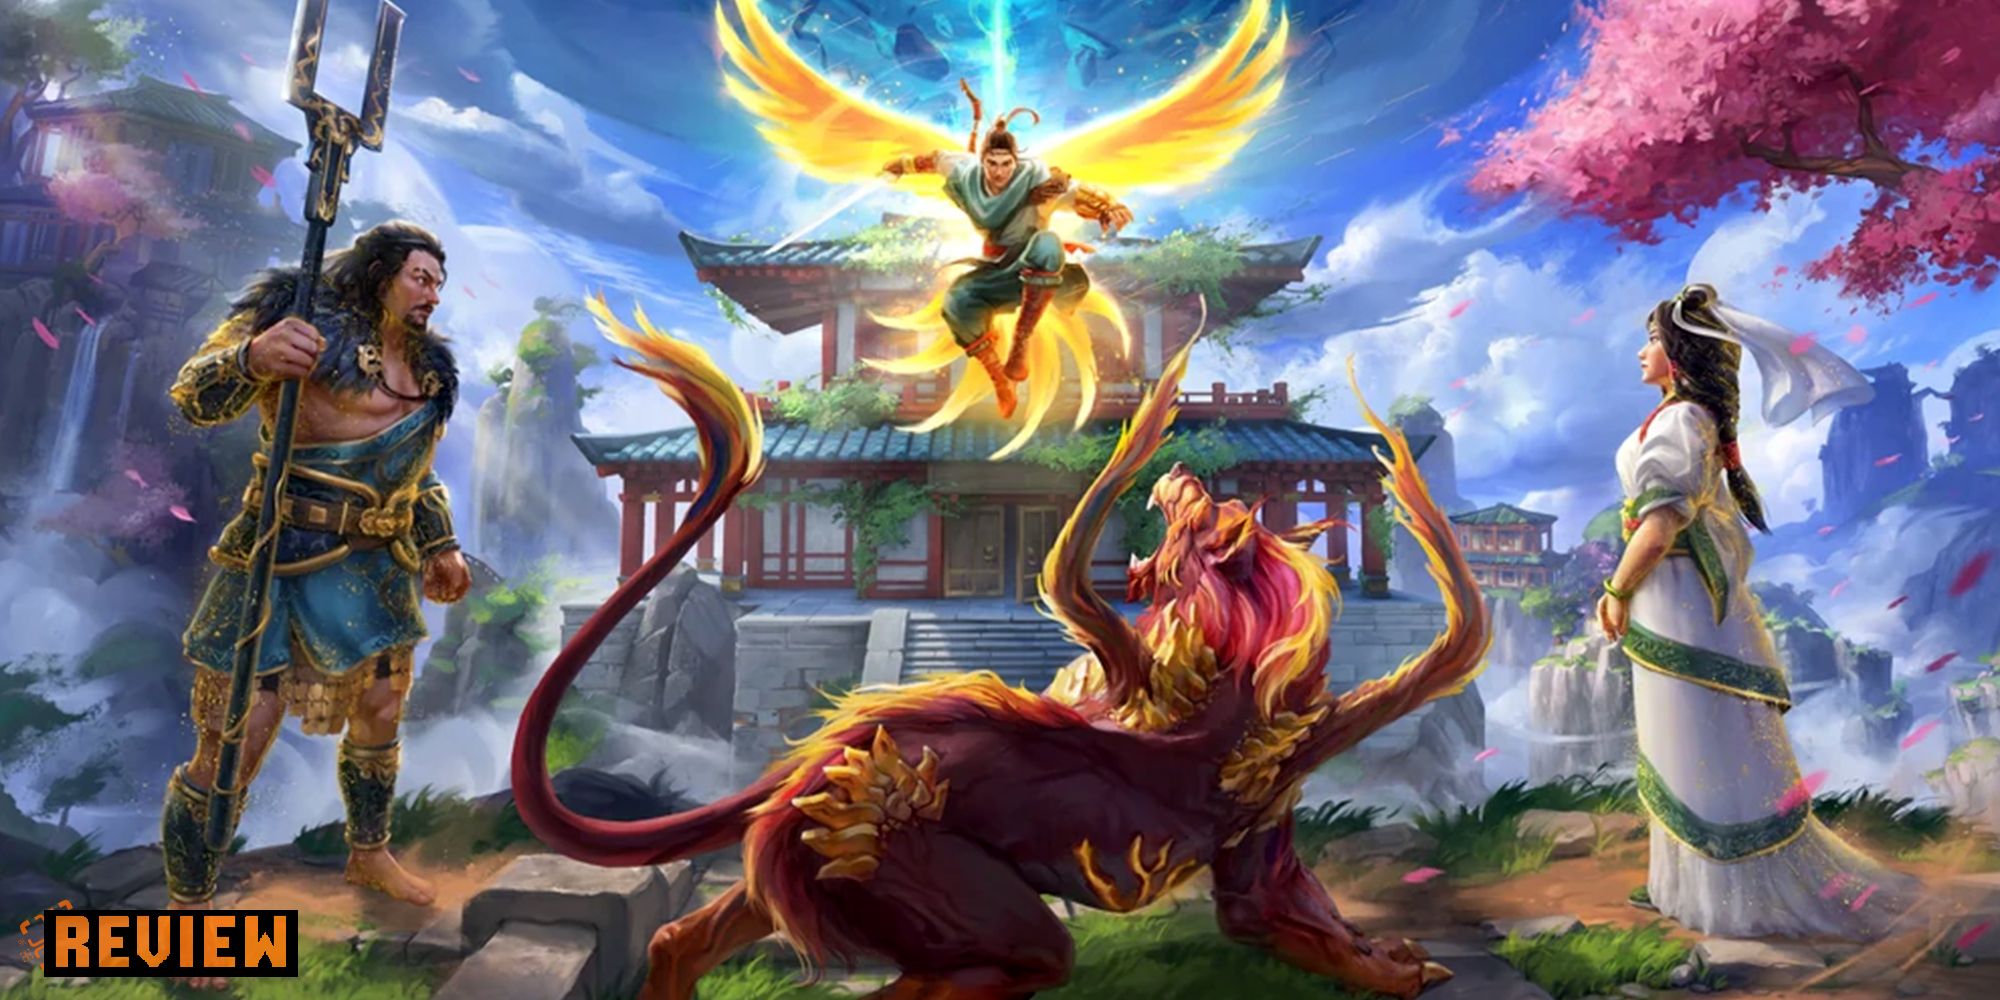 Game art from Myths of the Eastern Realm Immortals Fenyx Rising DLC.